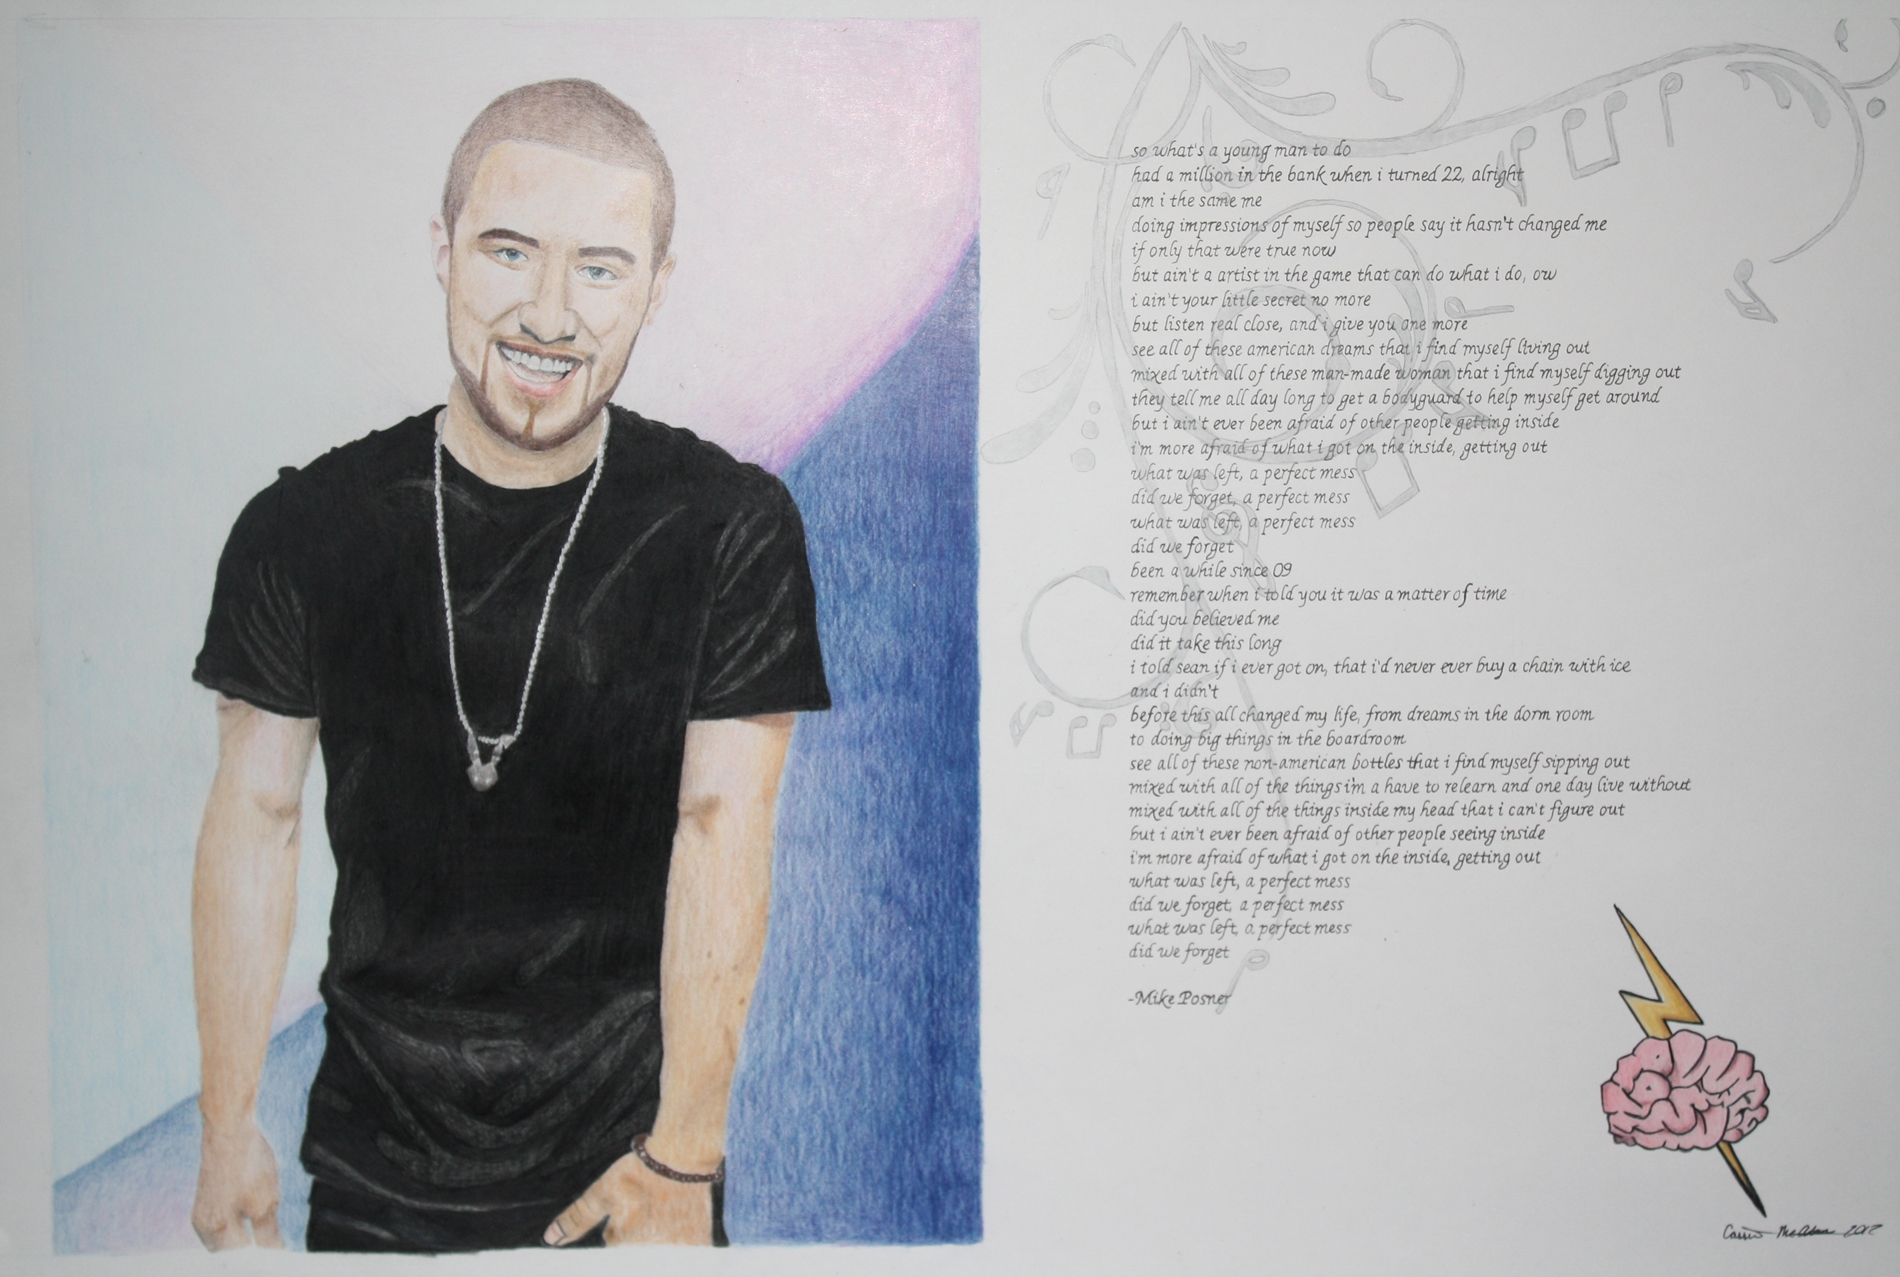 Mike Posner Drawing with "A Perfect Mess" Lyrics
Drawing by Cassie McAdams
